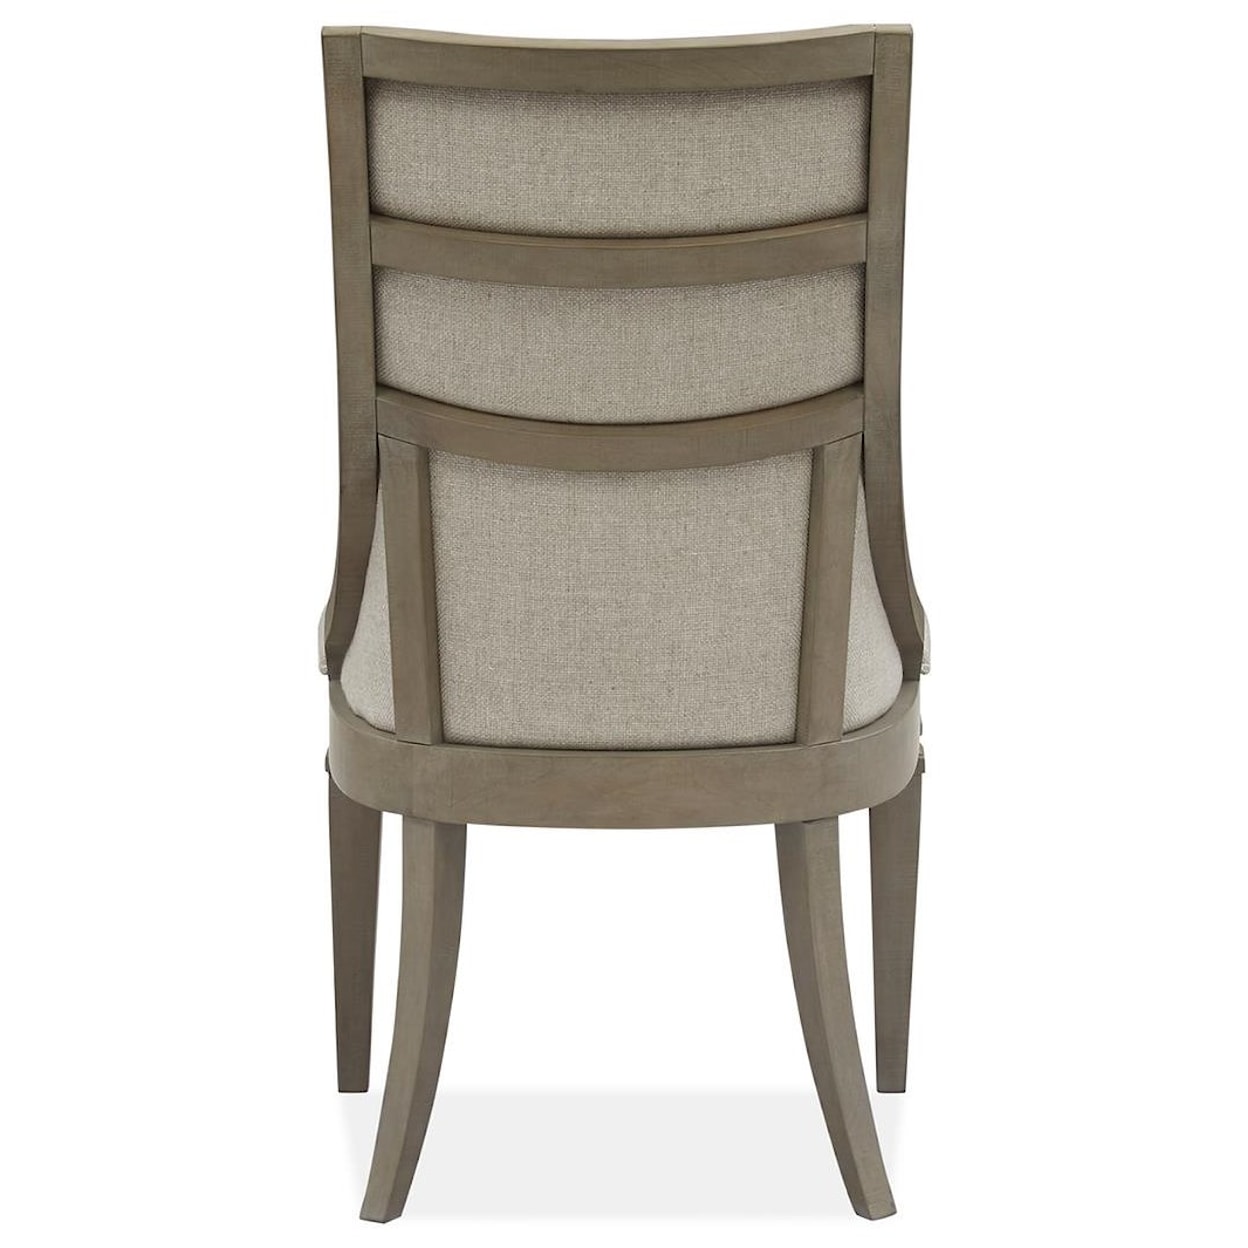 Magnussen Home Lancaster Dining Arm Chair